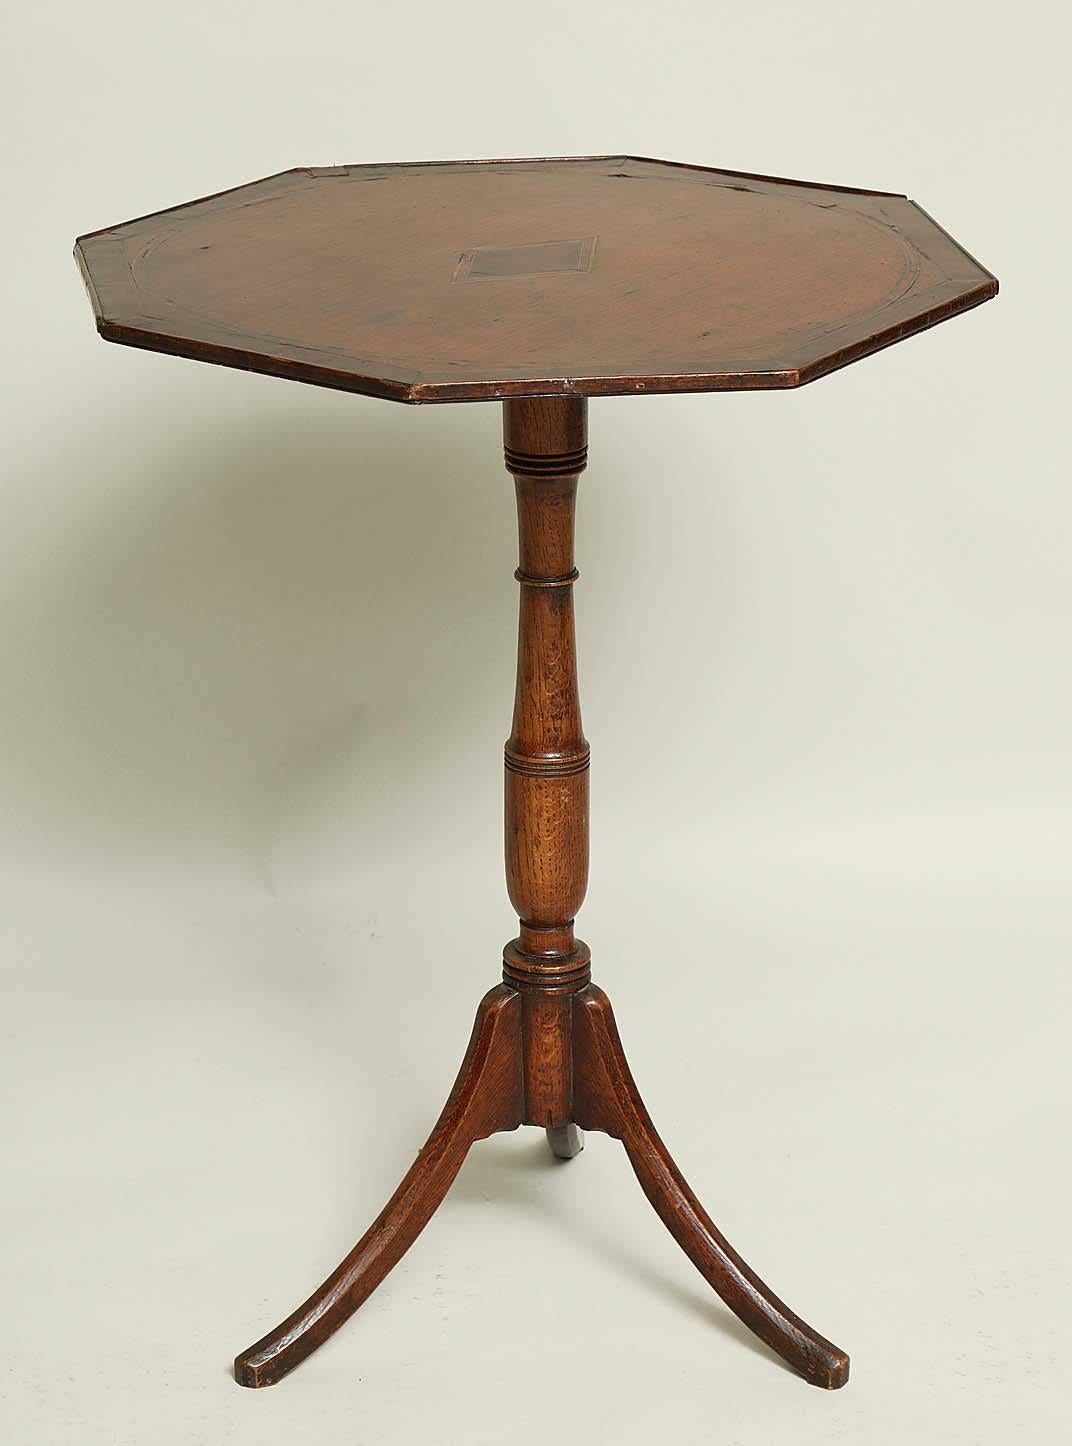 Early 19th Century Late Georgian Octagonal Oak Tripod Table with Inlaid Decoration